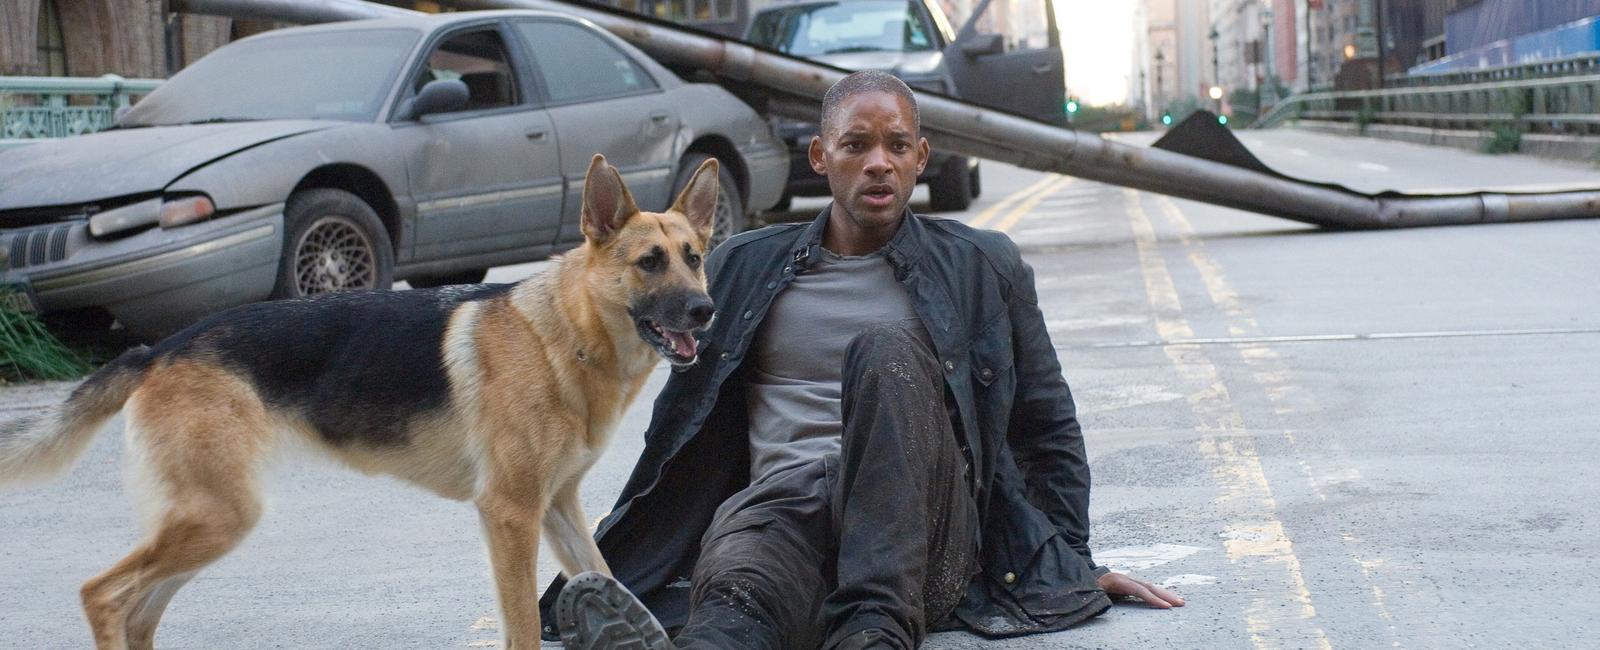 Will smith fell in love with his canine co star abbey in the movie i am legend he tried to adopt her when they finished filming but the dog s trainer didn t give her up